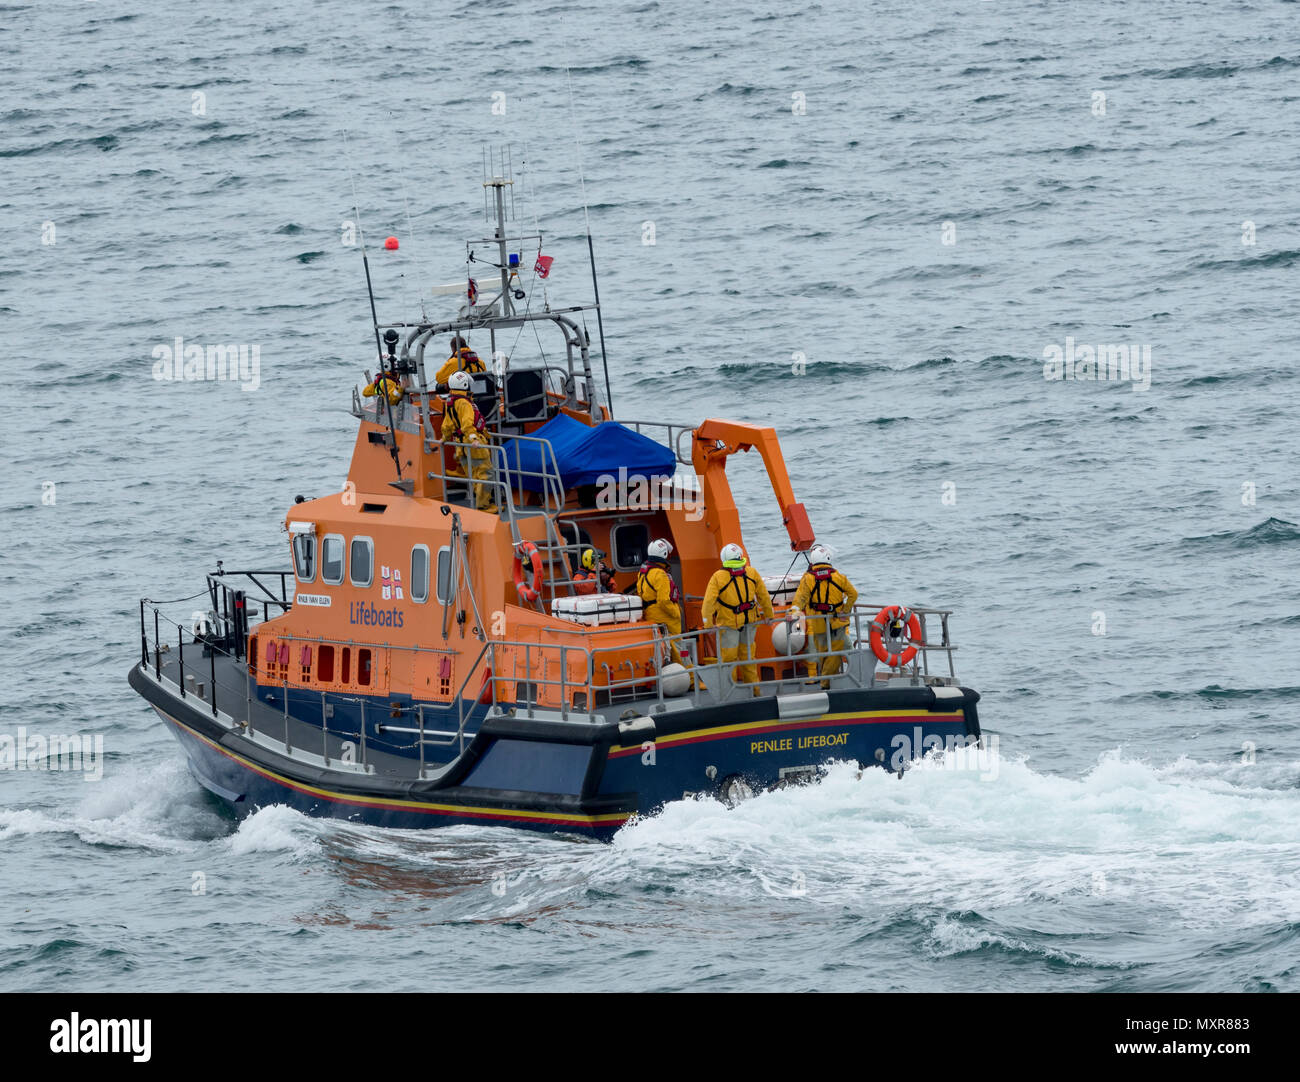 RNLI, Penlee Lifeboat Ivan Ellen off Newlyn, heading out for a training exercise with the coastguard Stock Photo